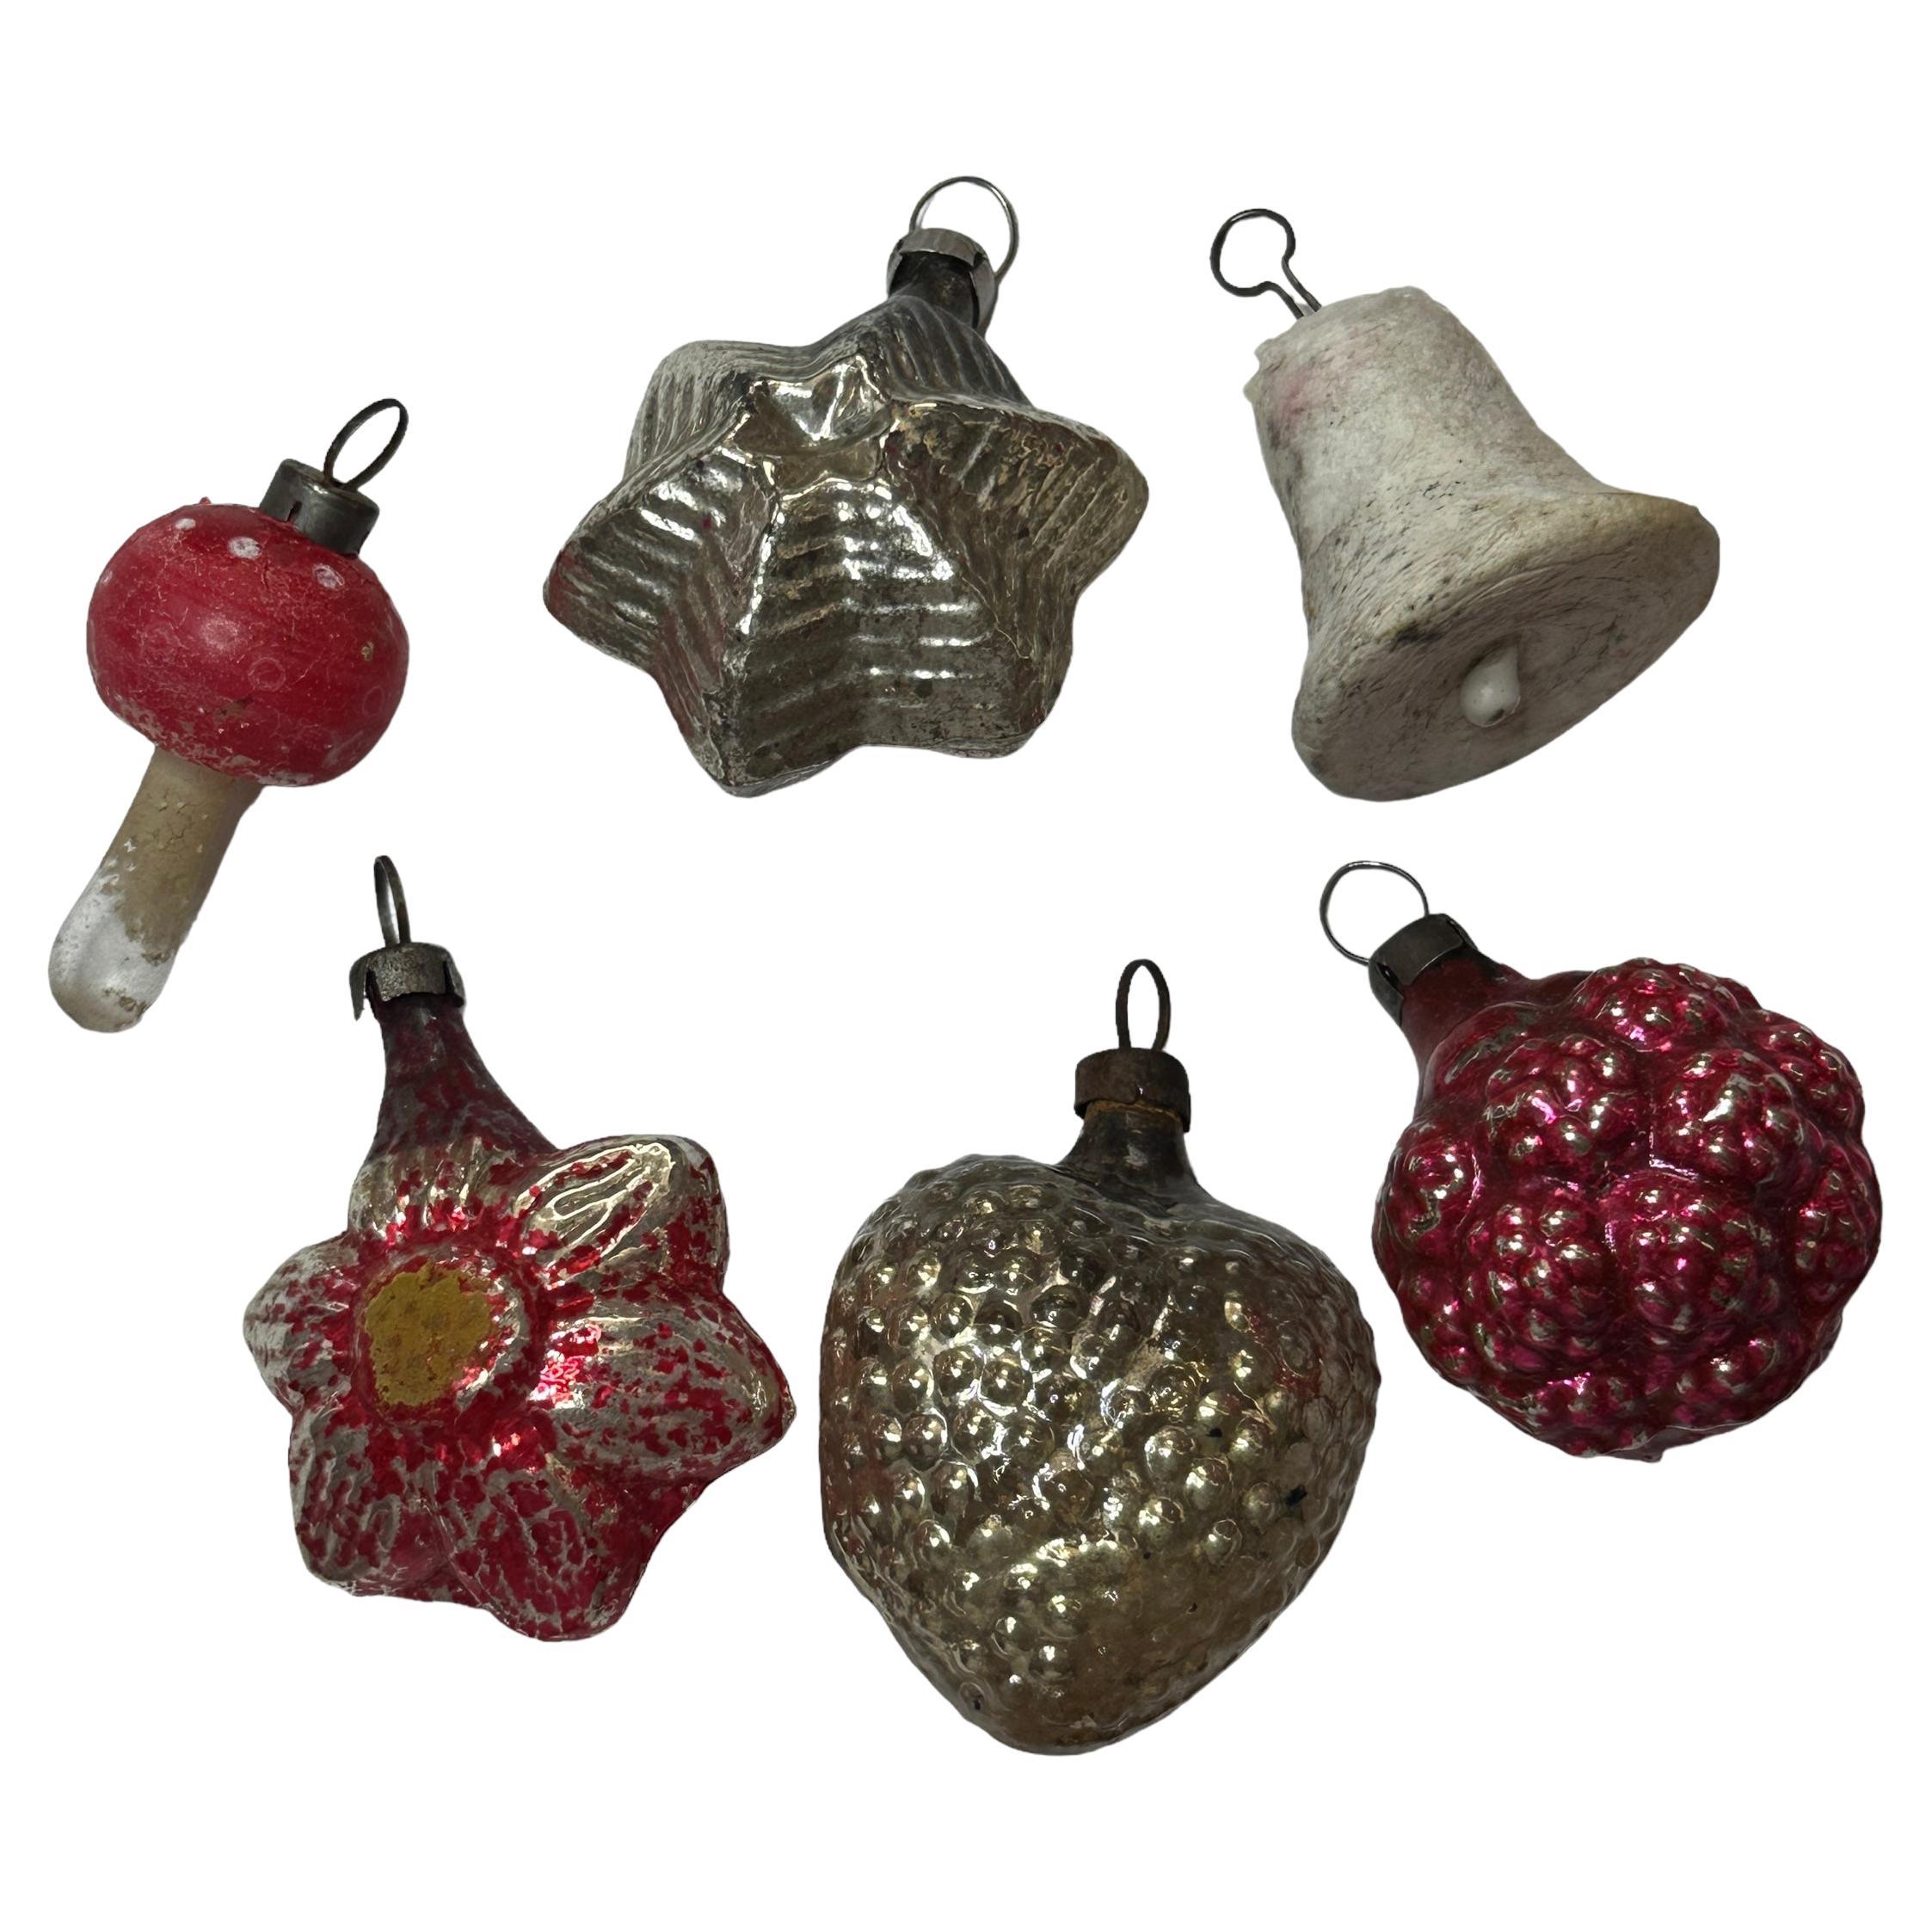 A rare Christmas ornament set from Germany or Austria. Each is made from mouth blown glass, one of pressed cotton, this would be a great addition for your Christmas or feather tree. Size always given for the tallest item in the pictures. Age approx.